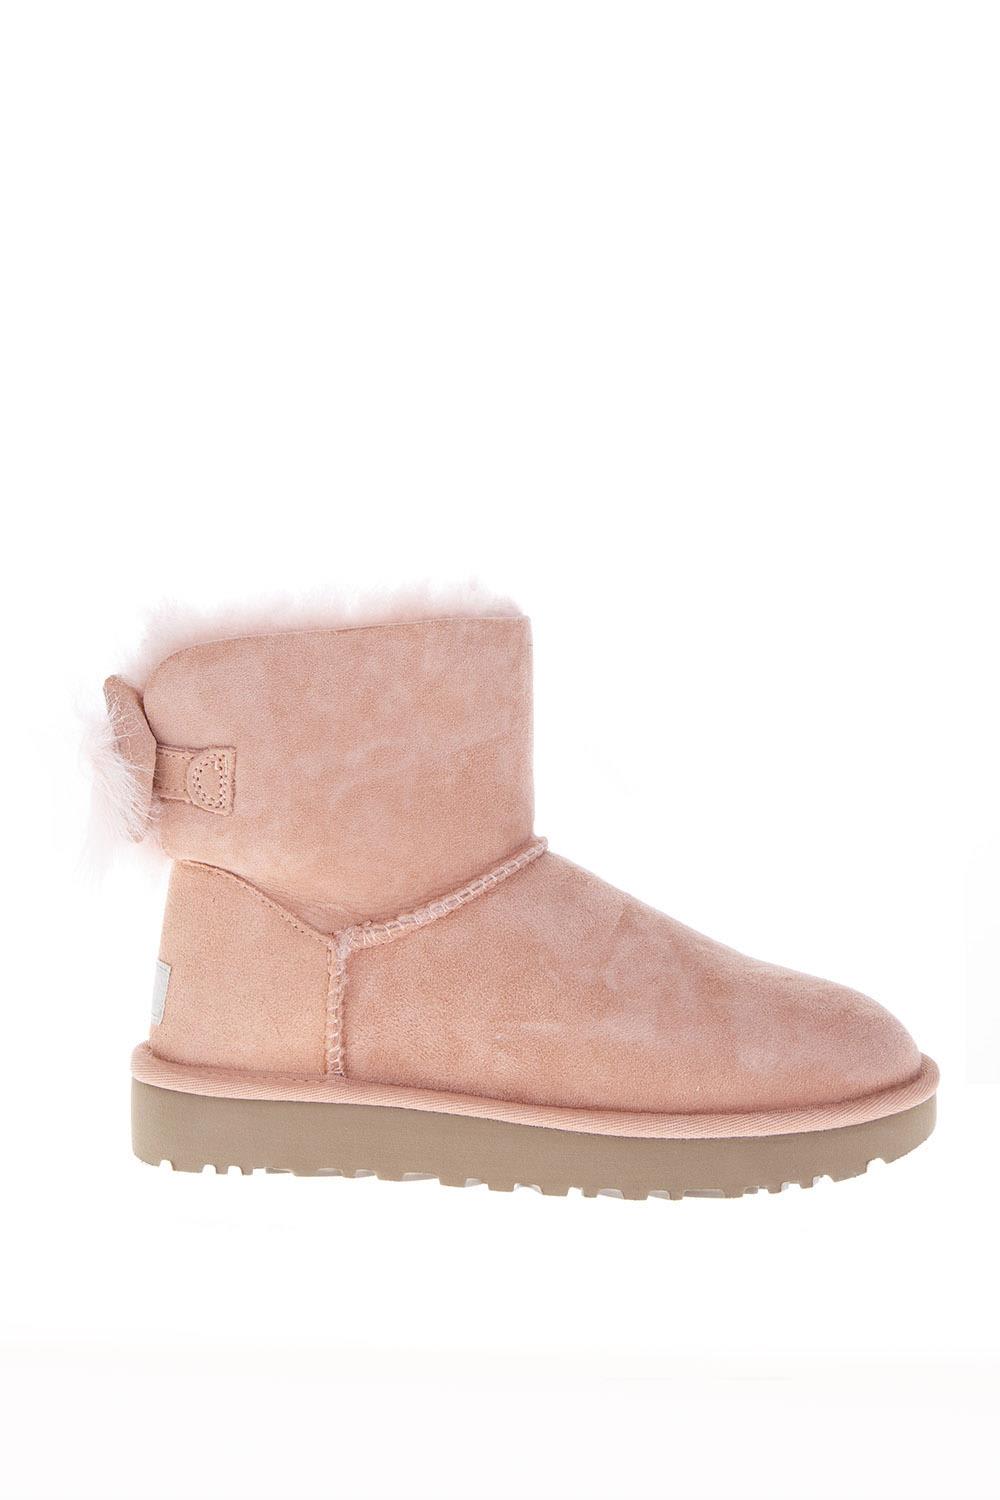 Buy UGG Fluff Pink Mini Boots online, shop UGG shoes with free shipping